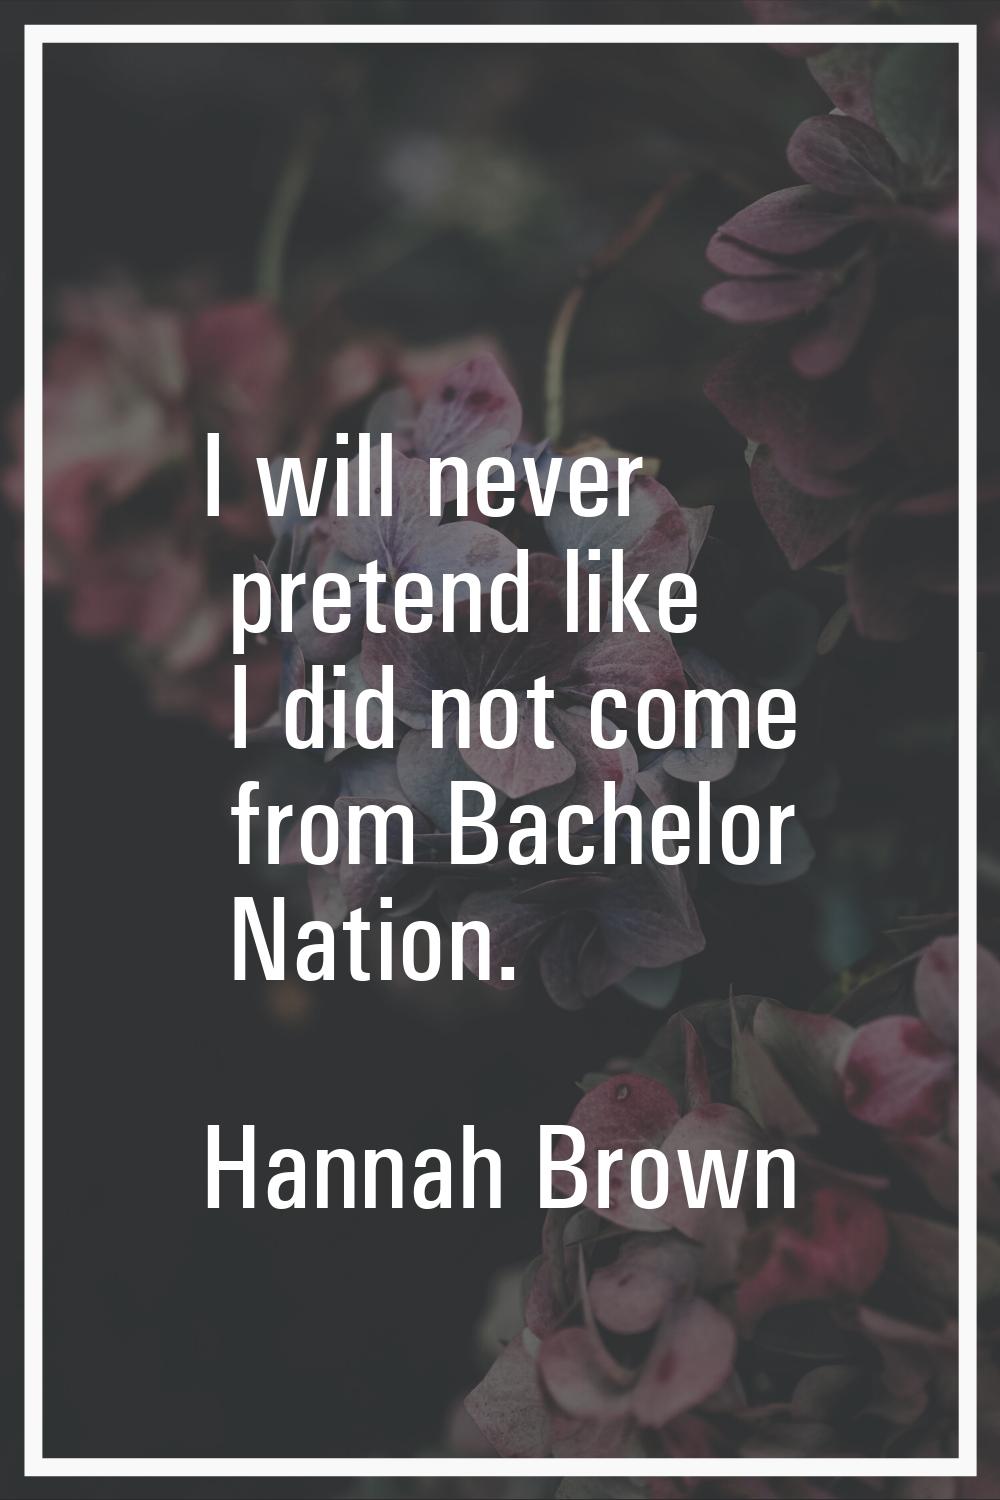 I will never pretend like I did not come from Bachelor Nation.